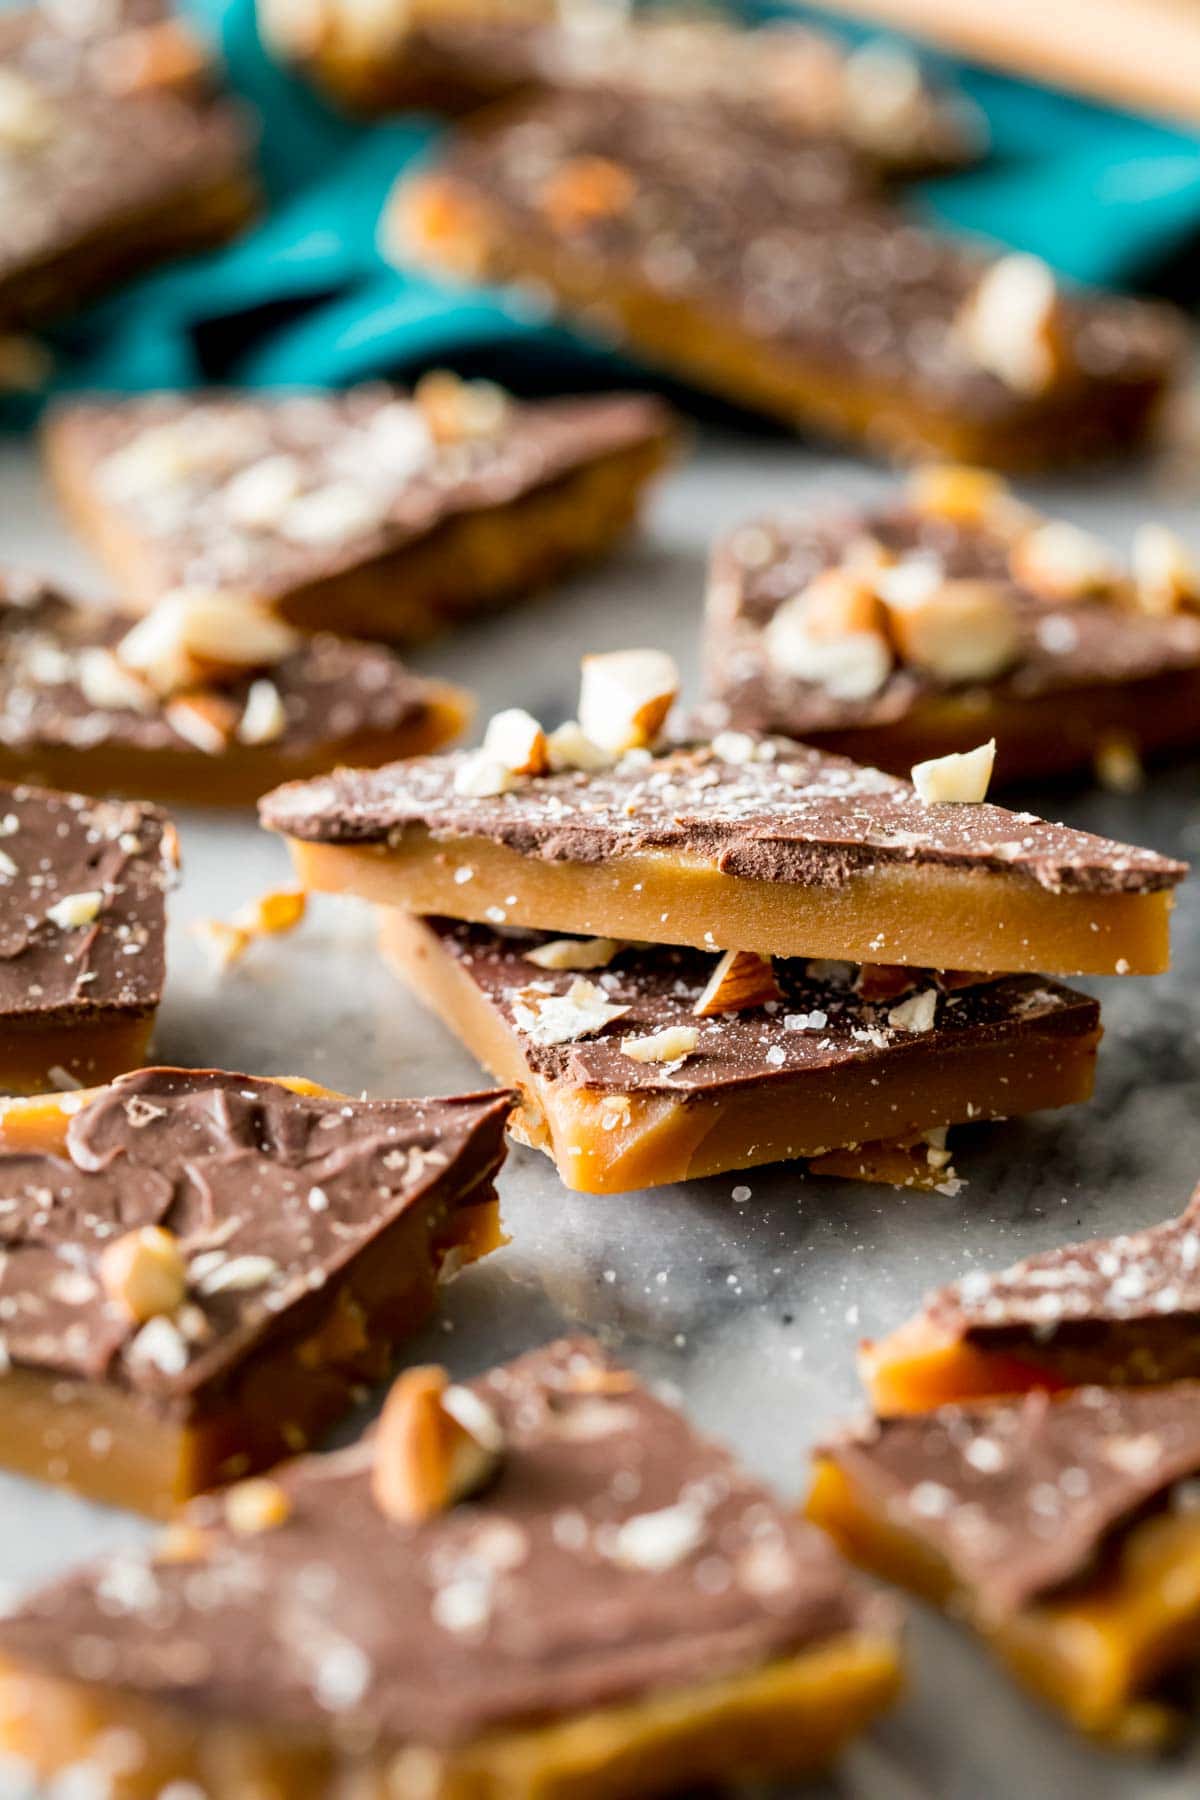 Toffee pieces after being broken apart.